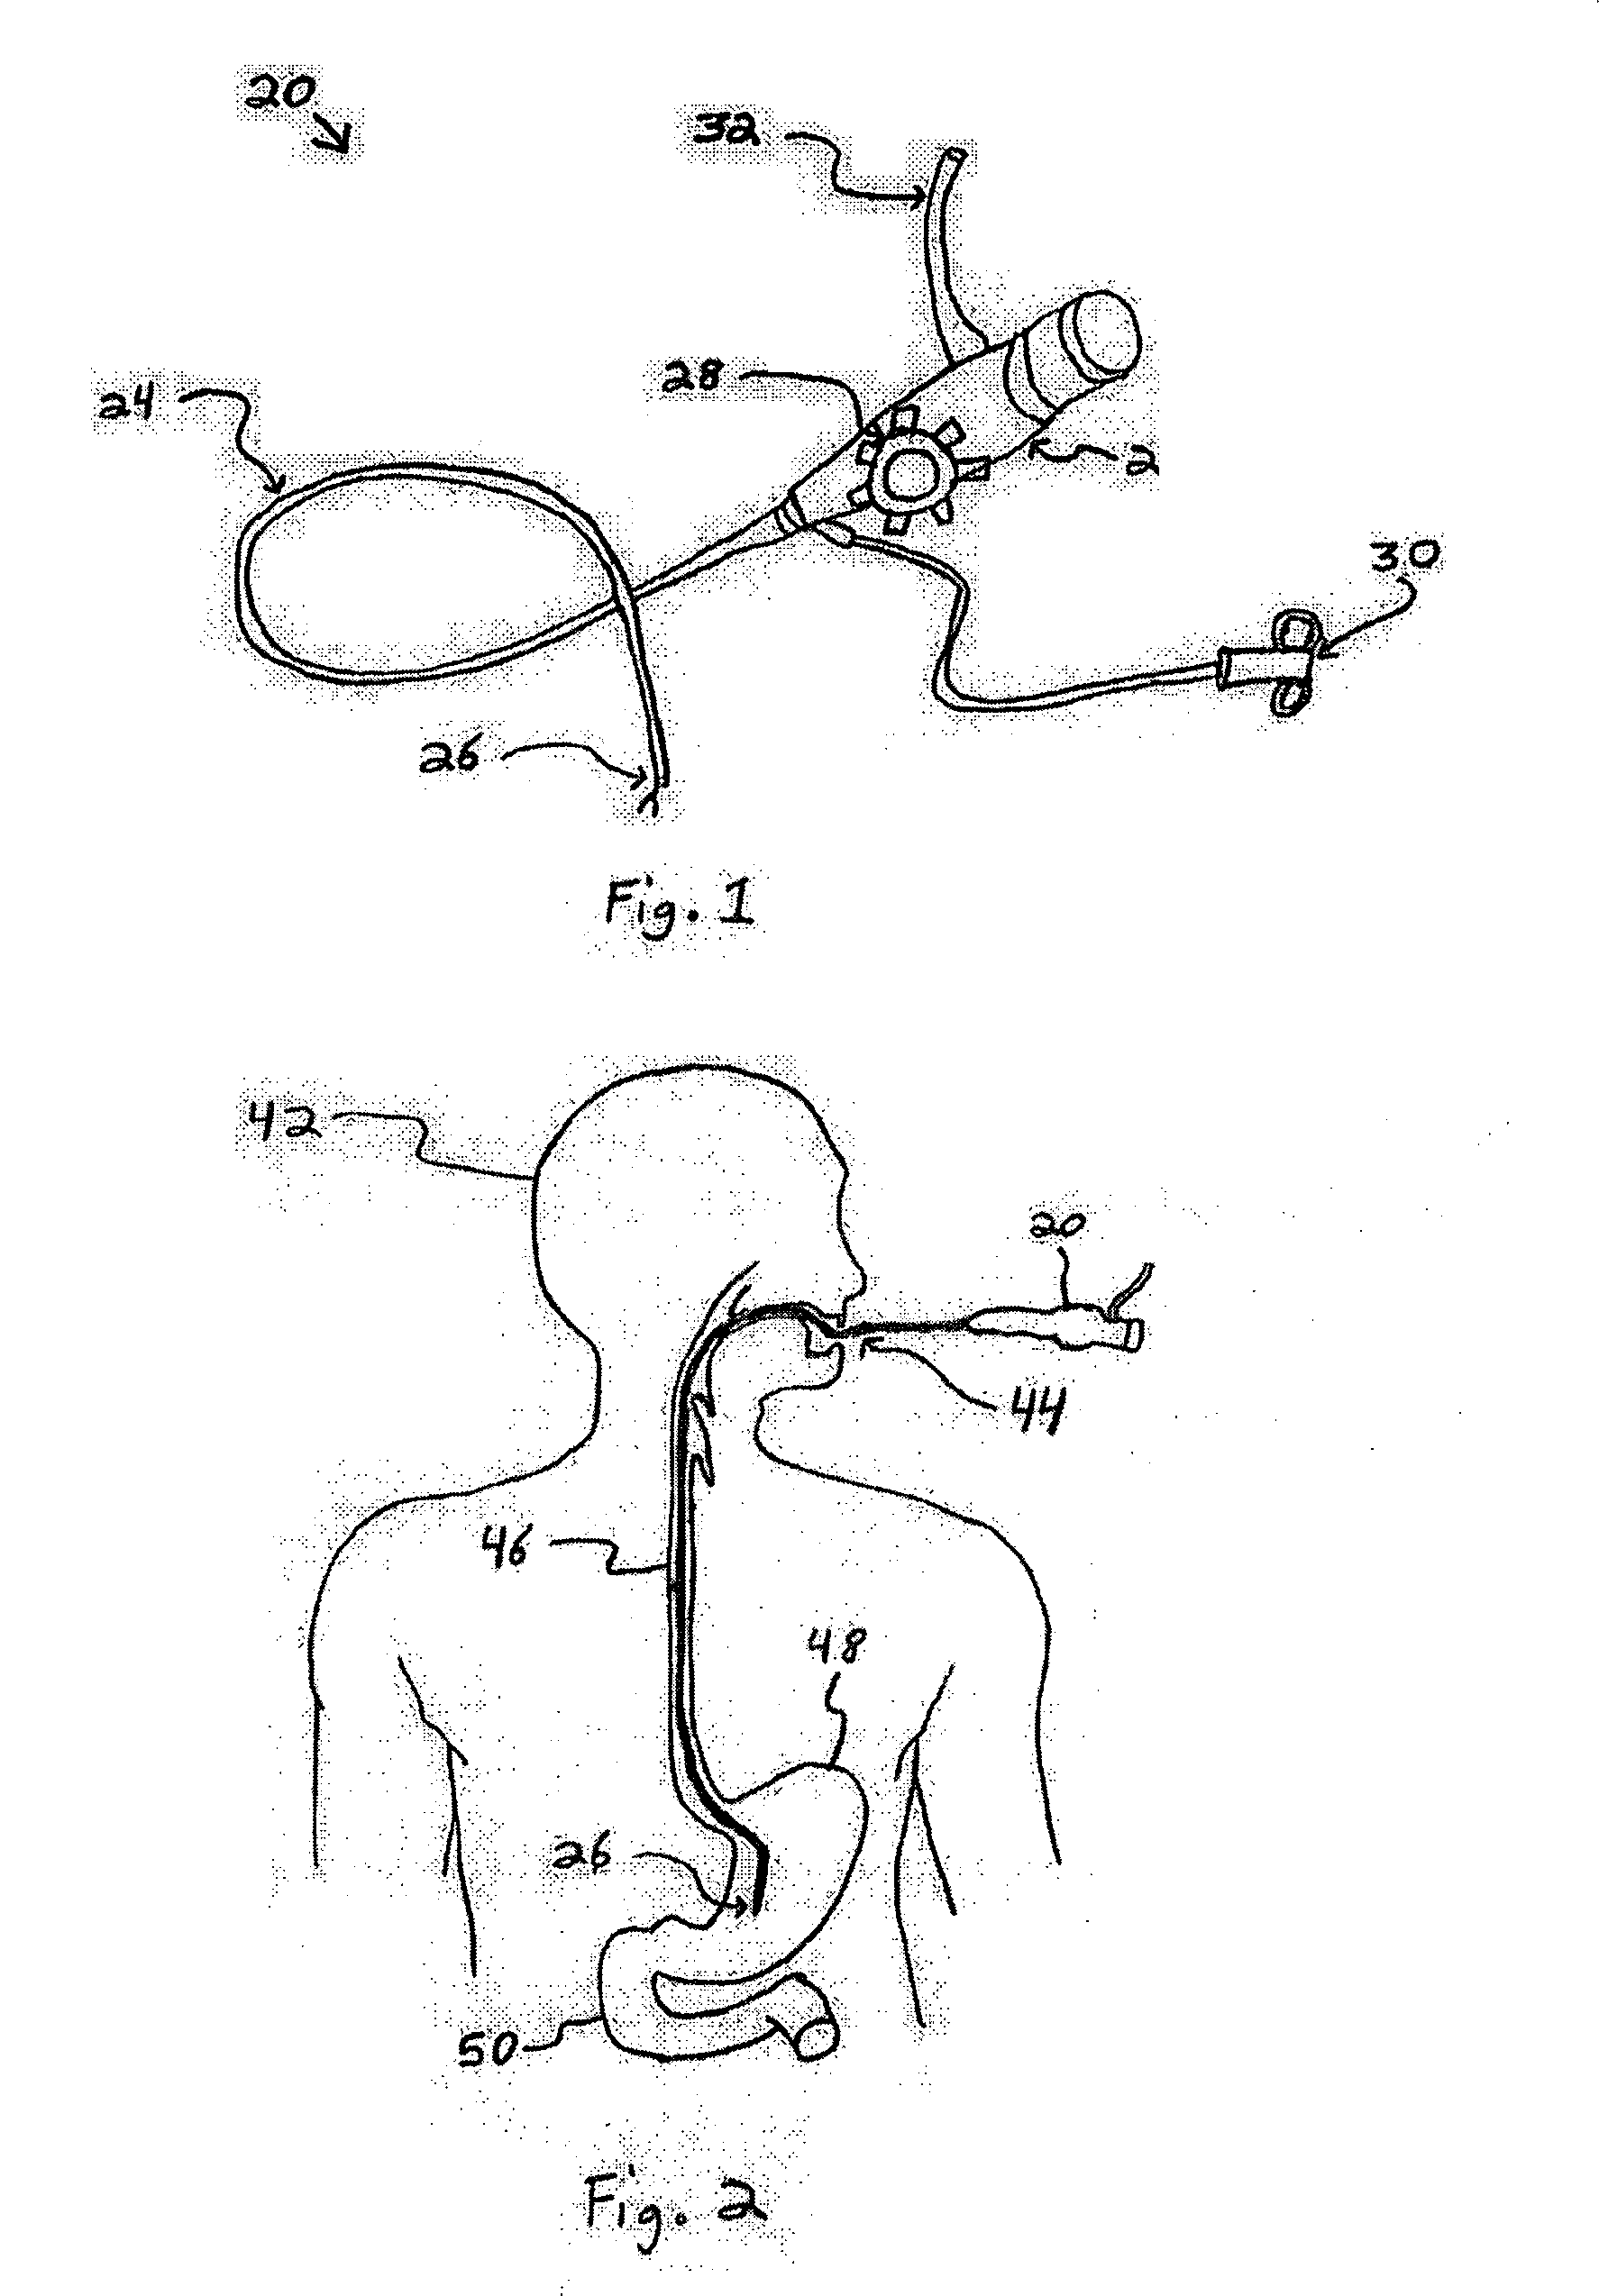 System and method for determining an optimal surgical trajectory